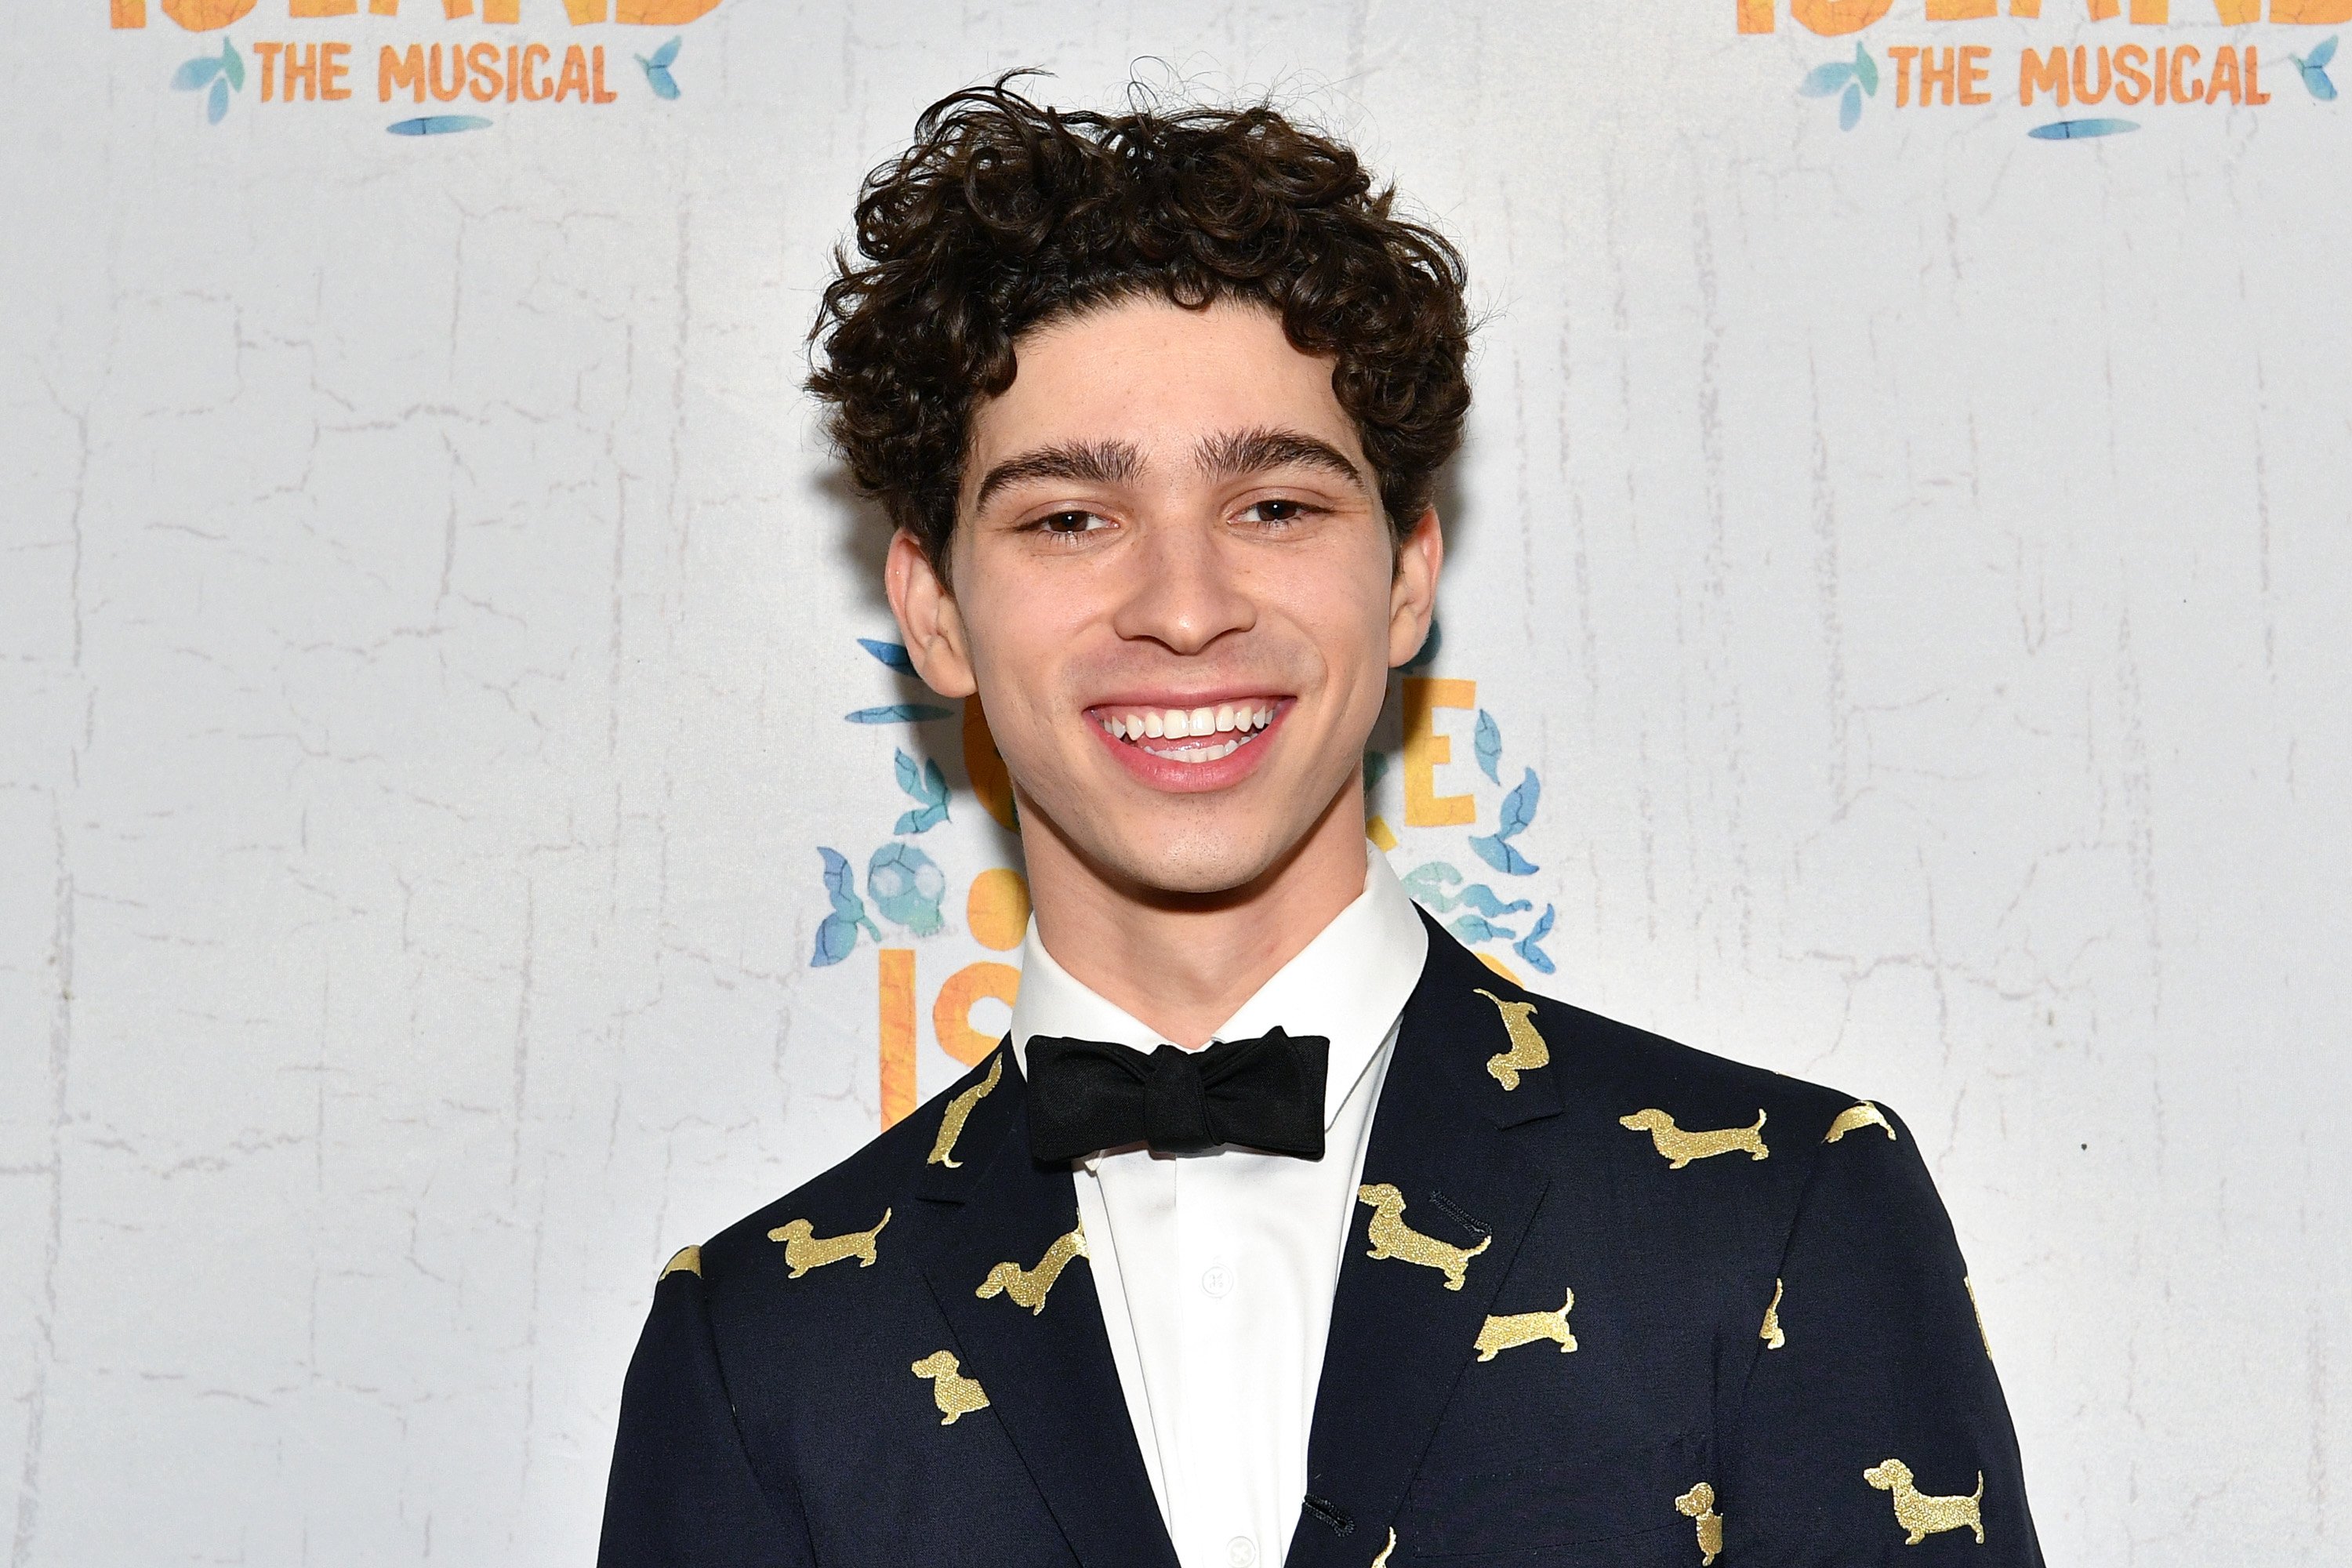 Isaac Powell appears at the opening night of 'Once on the Island' Powell was announced as part of the cast of 'And Just Like That...' but he never actually appeared in the HBO Max reboot